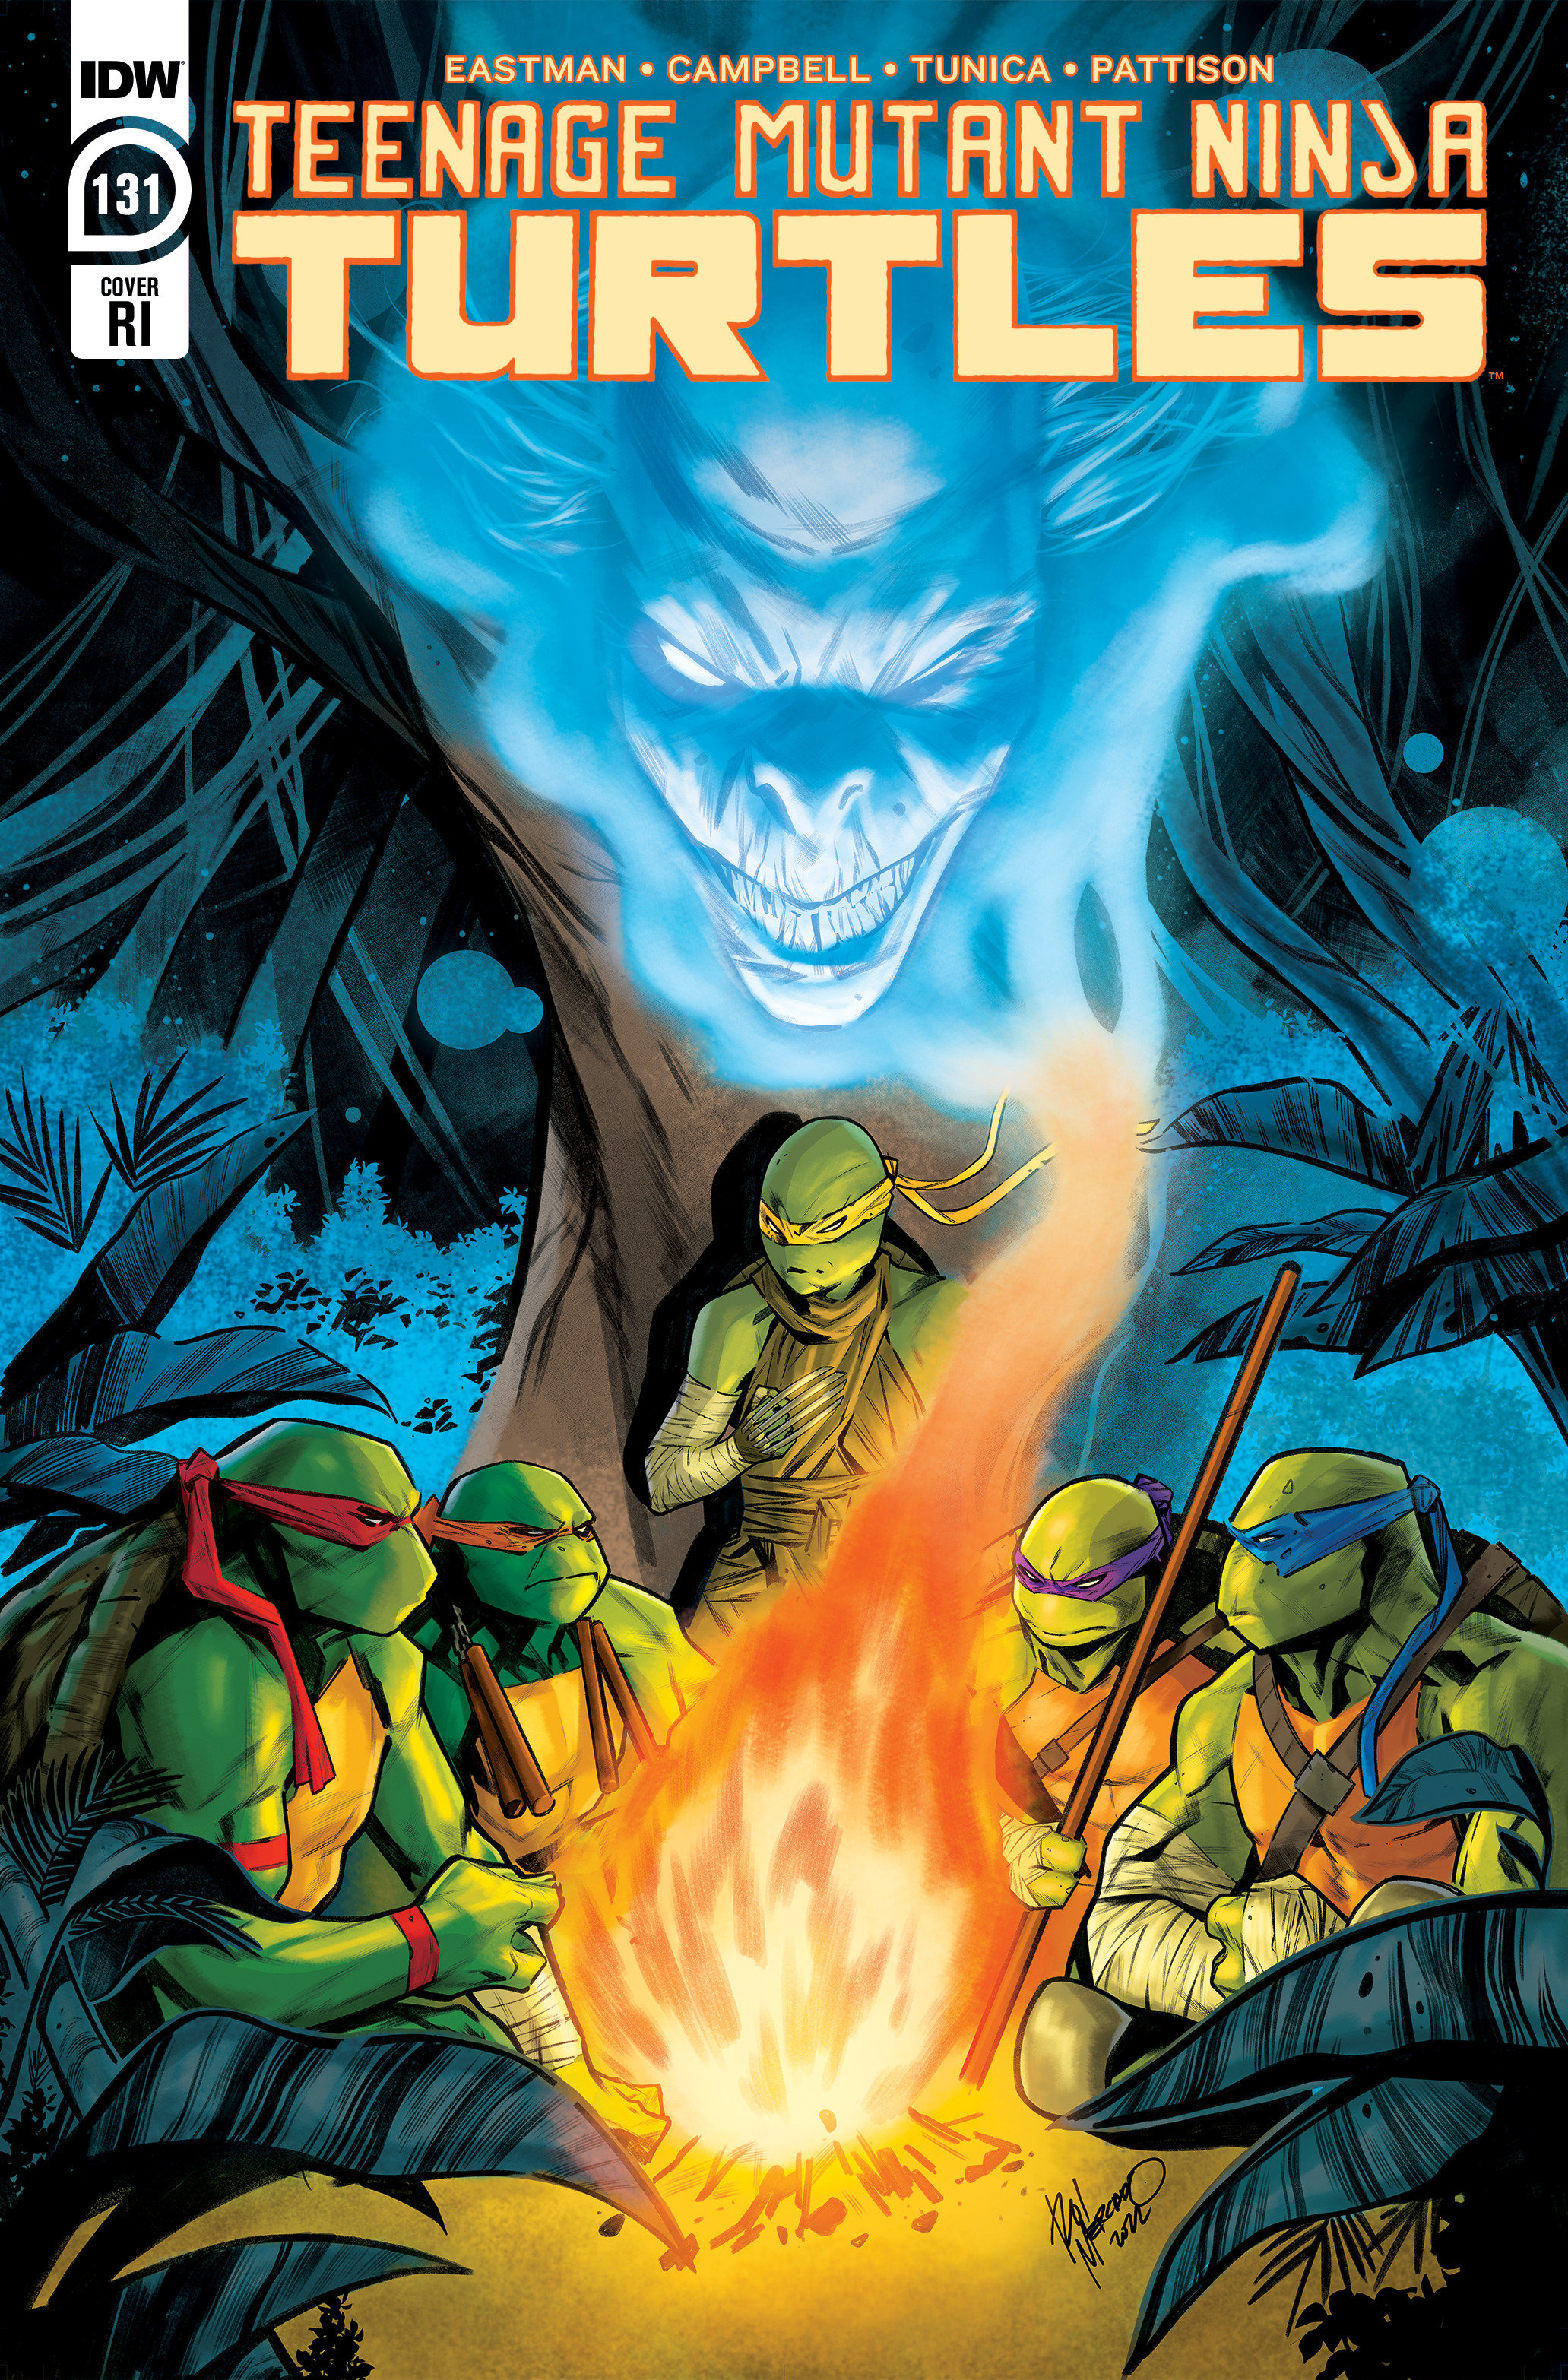 Teenage Mutant Ninja Turtles Ongoing #131 Cover Retailer Incentive Mercado 1 for 10 Incentive Variant (2011)